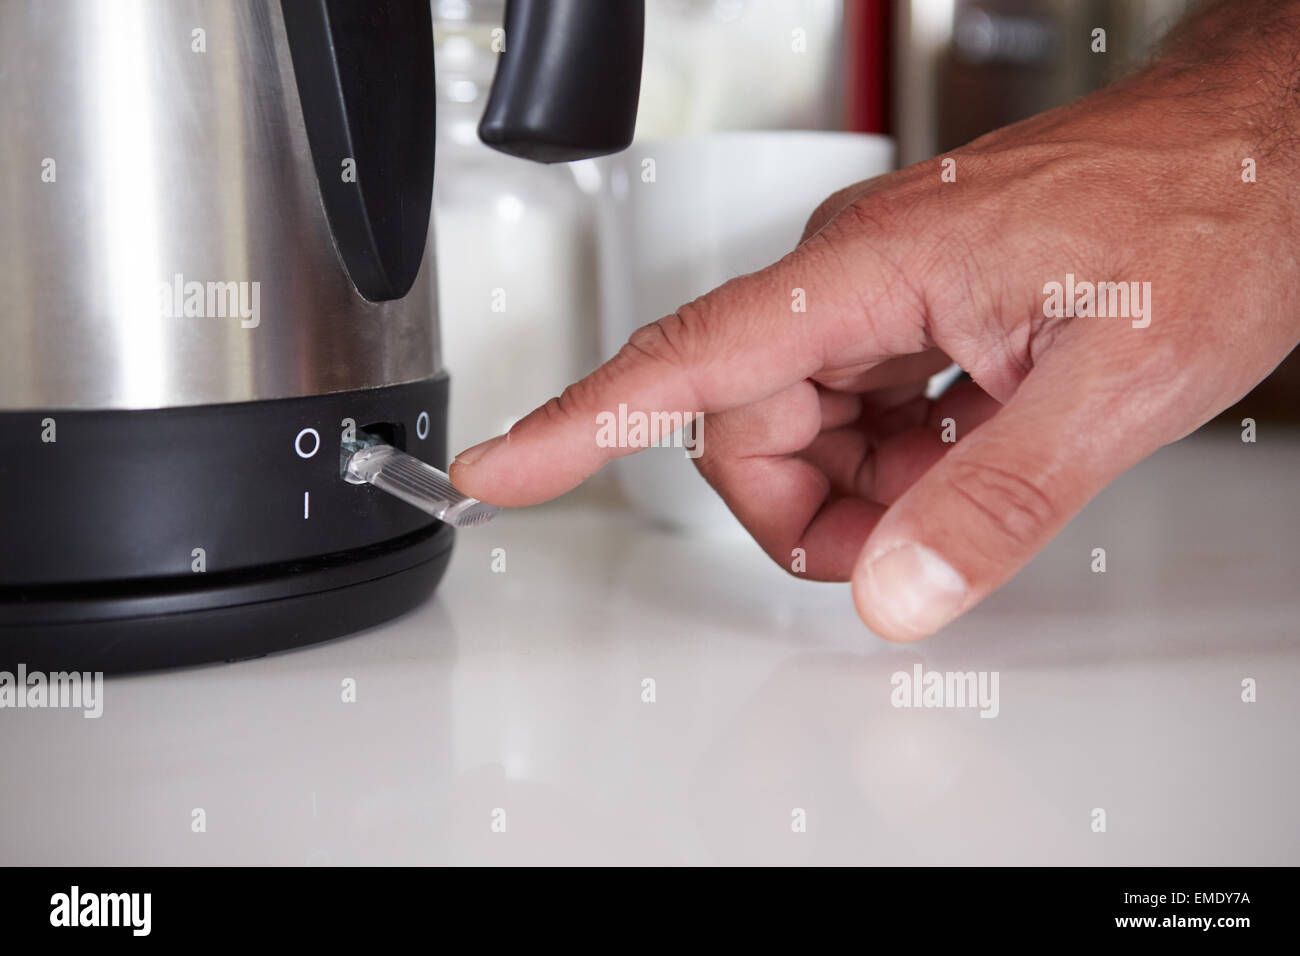 Close Up Of Man Turning On Switch To Boil Kettle Stock Photo